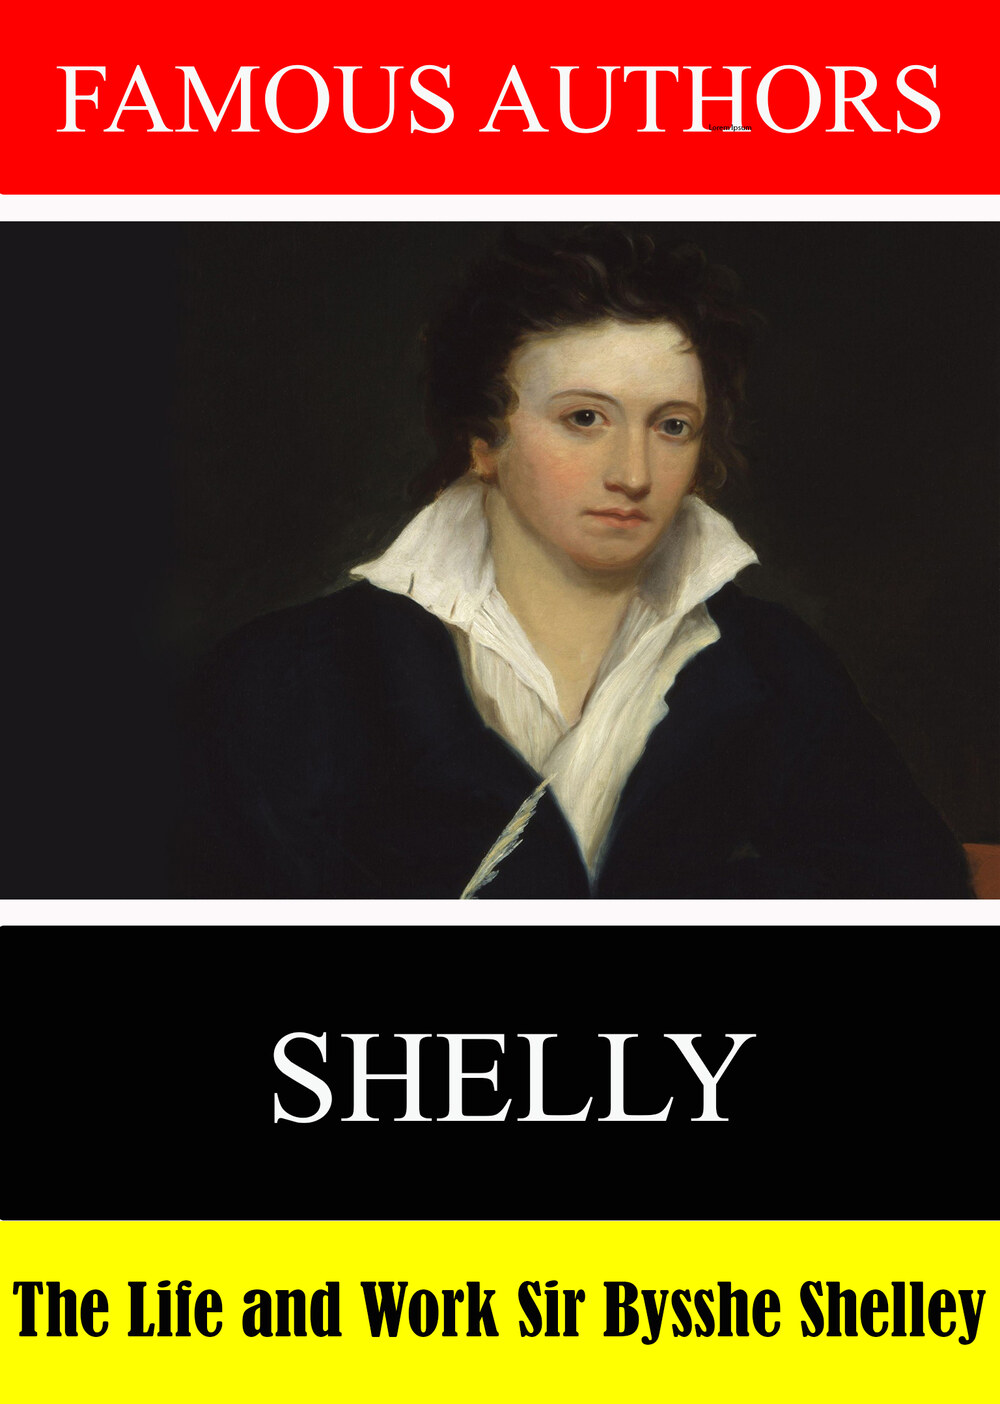 L7905 - Famous Authors: The Life and Work of Sir Bysshe Shelley